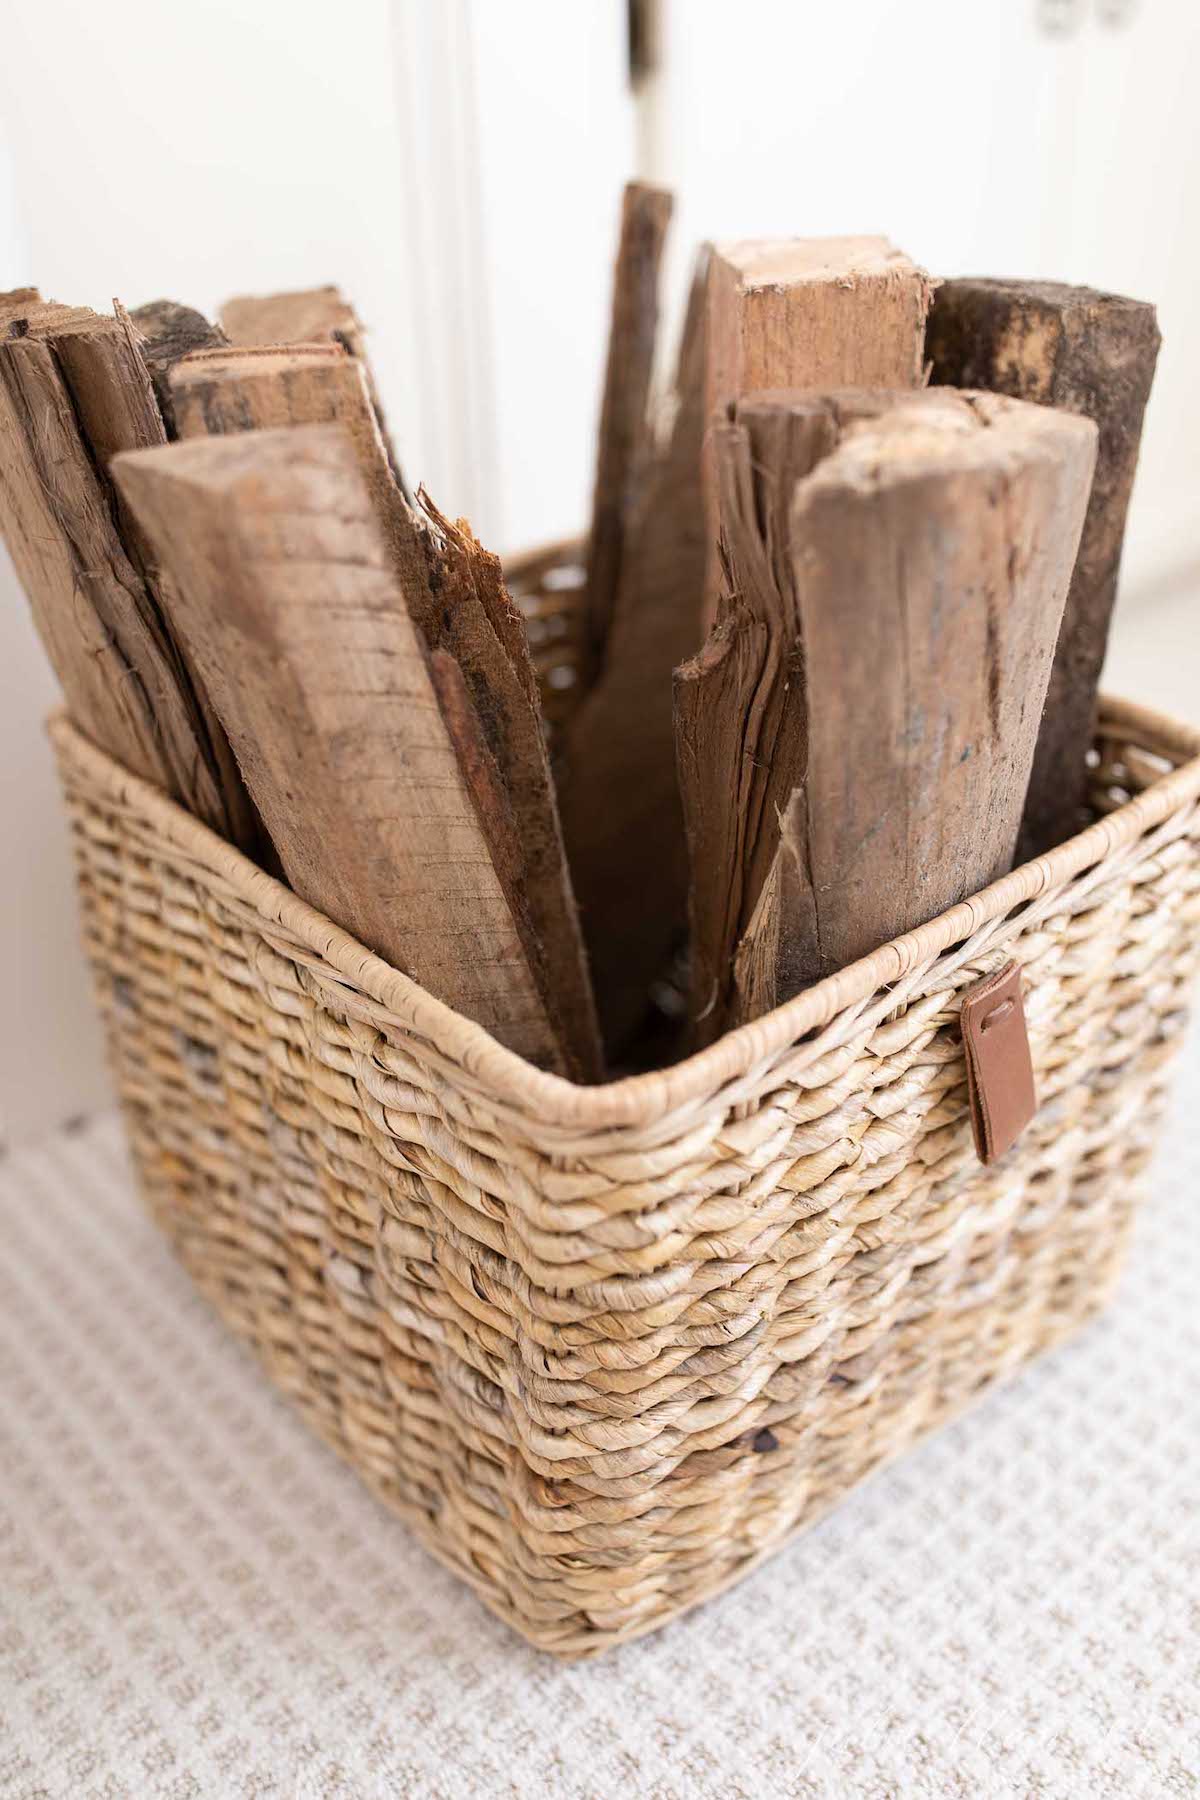 A minimalist wicker basket filled with wood logs, perfect for fall decor.